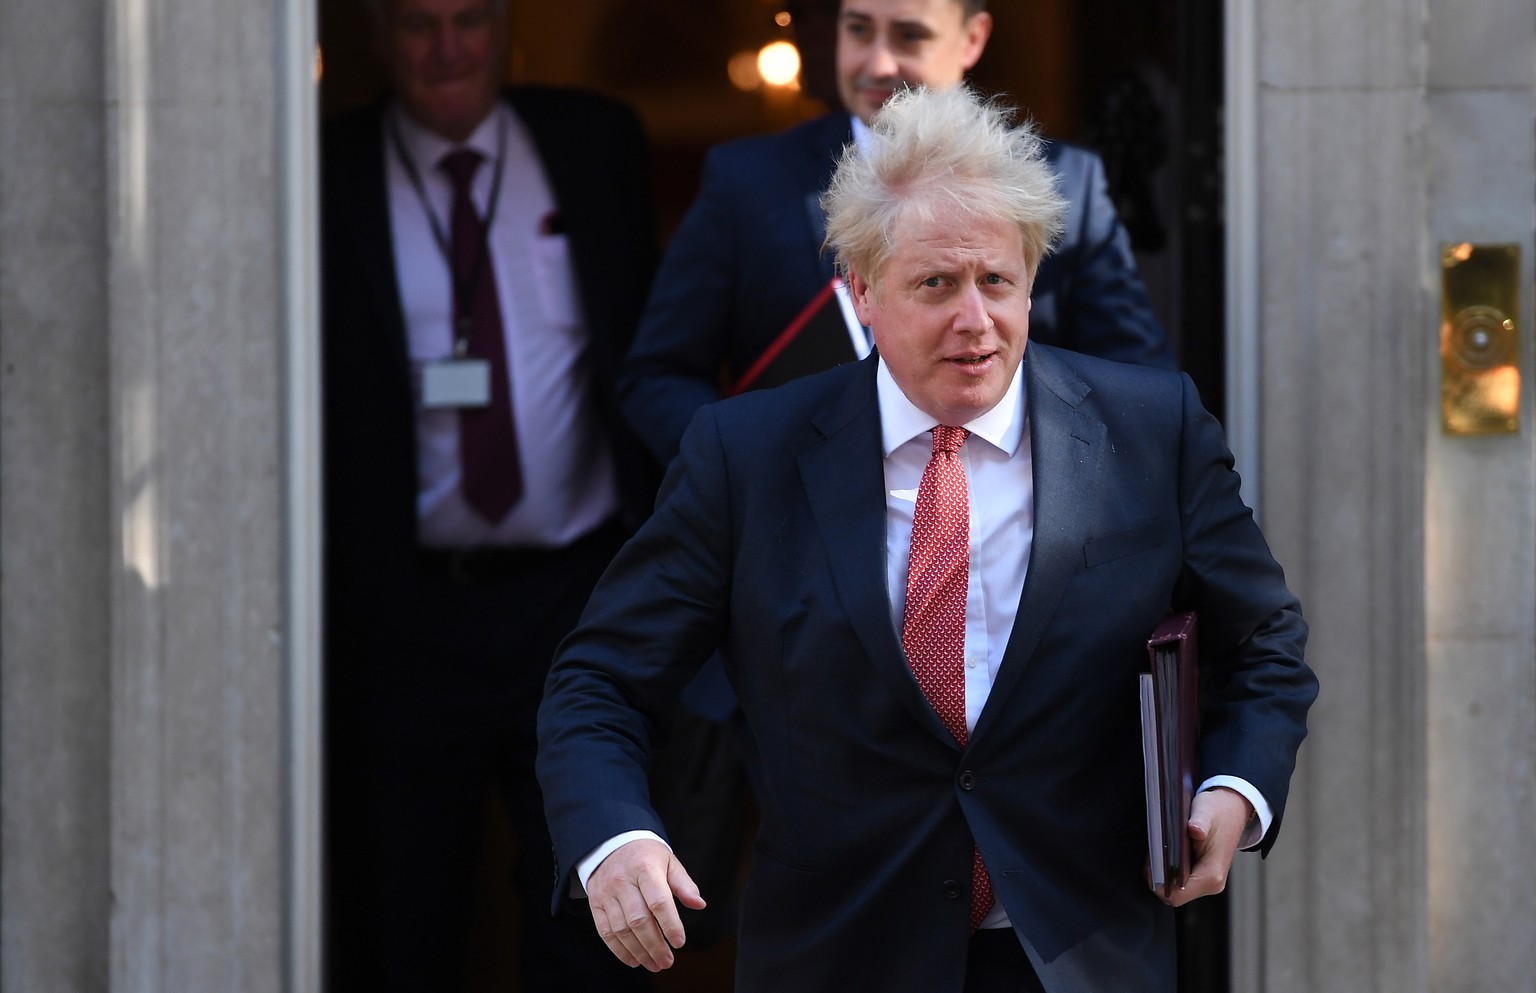 epa08557946 British Prime Minister Boris Johnson departs 10 Downing Street in London, Britain, 21 July 2020. Johnson held his first face to face cabinet meeting since lockdown began some four months a ...